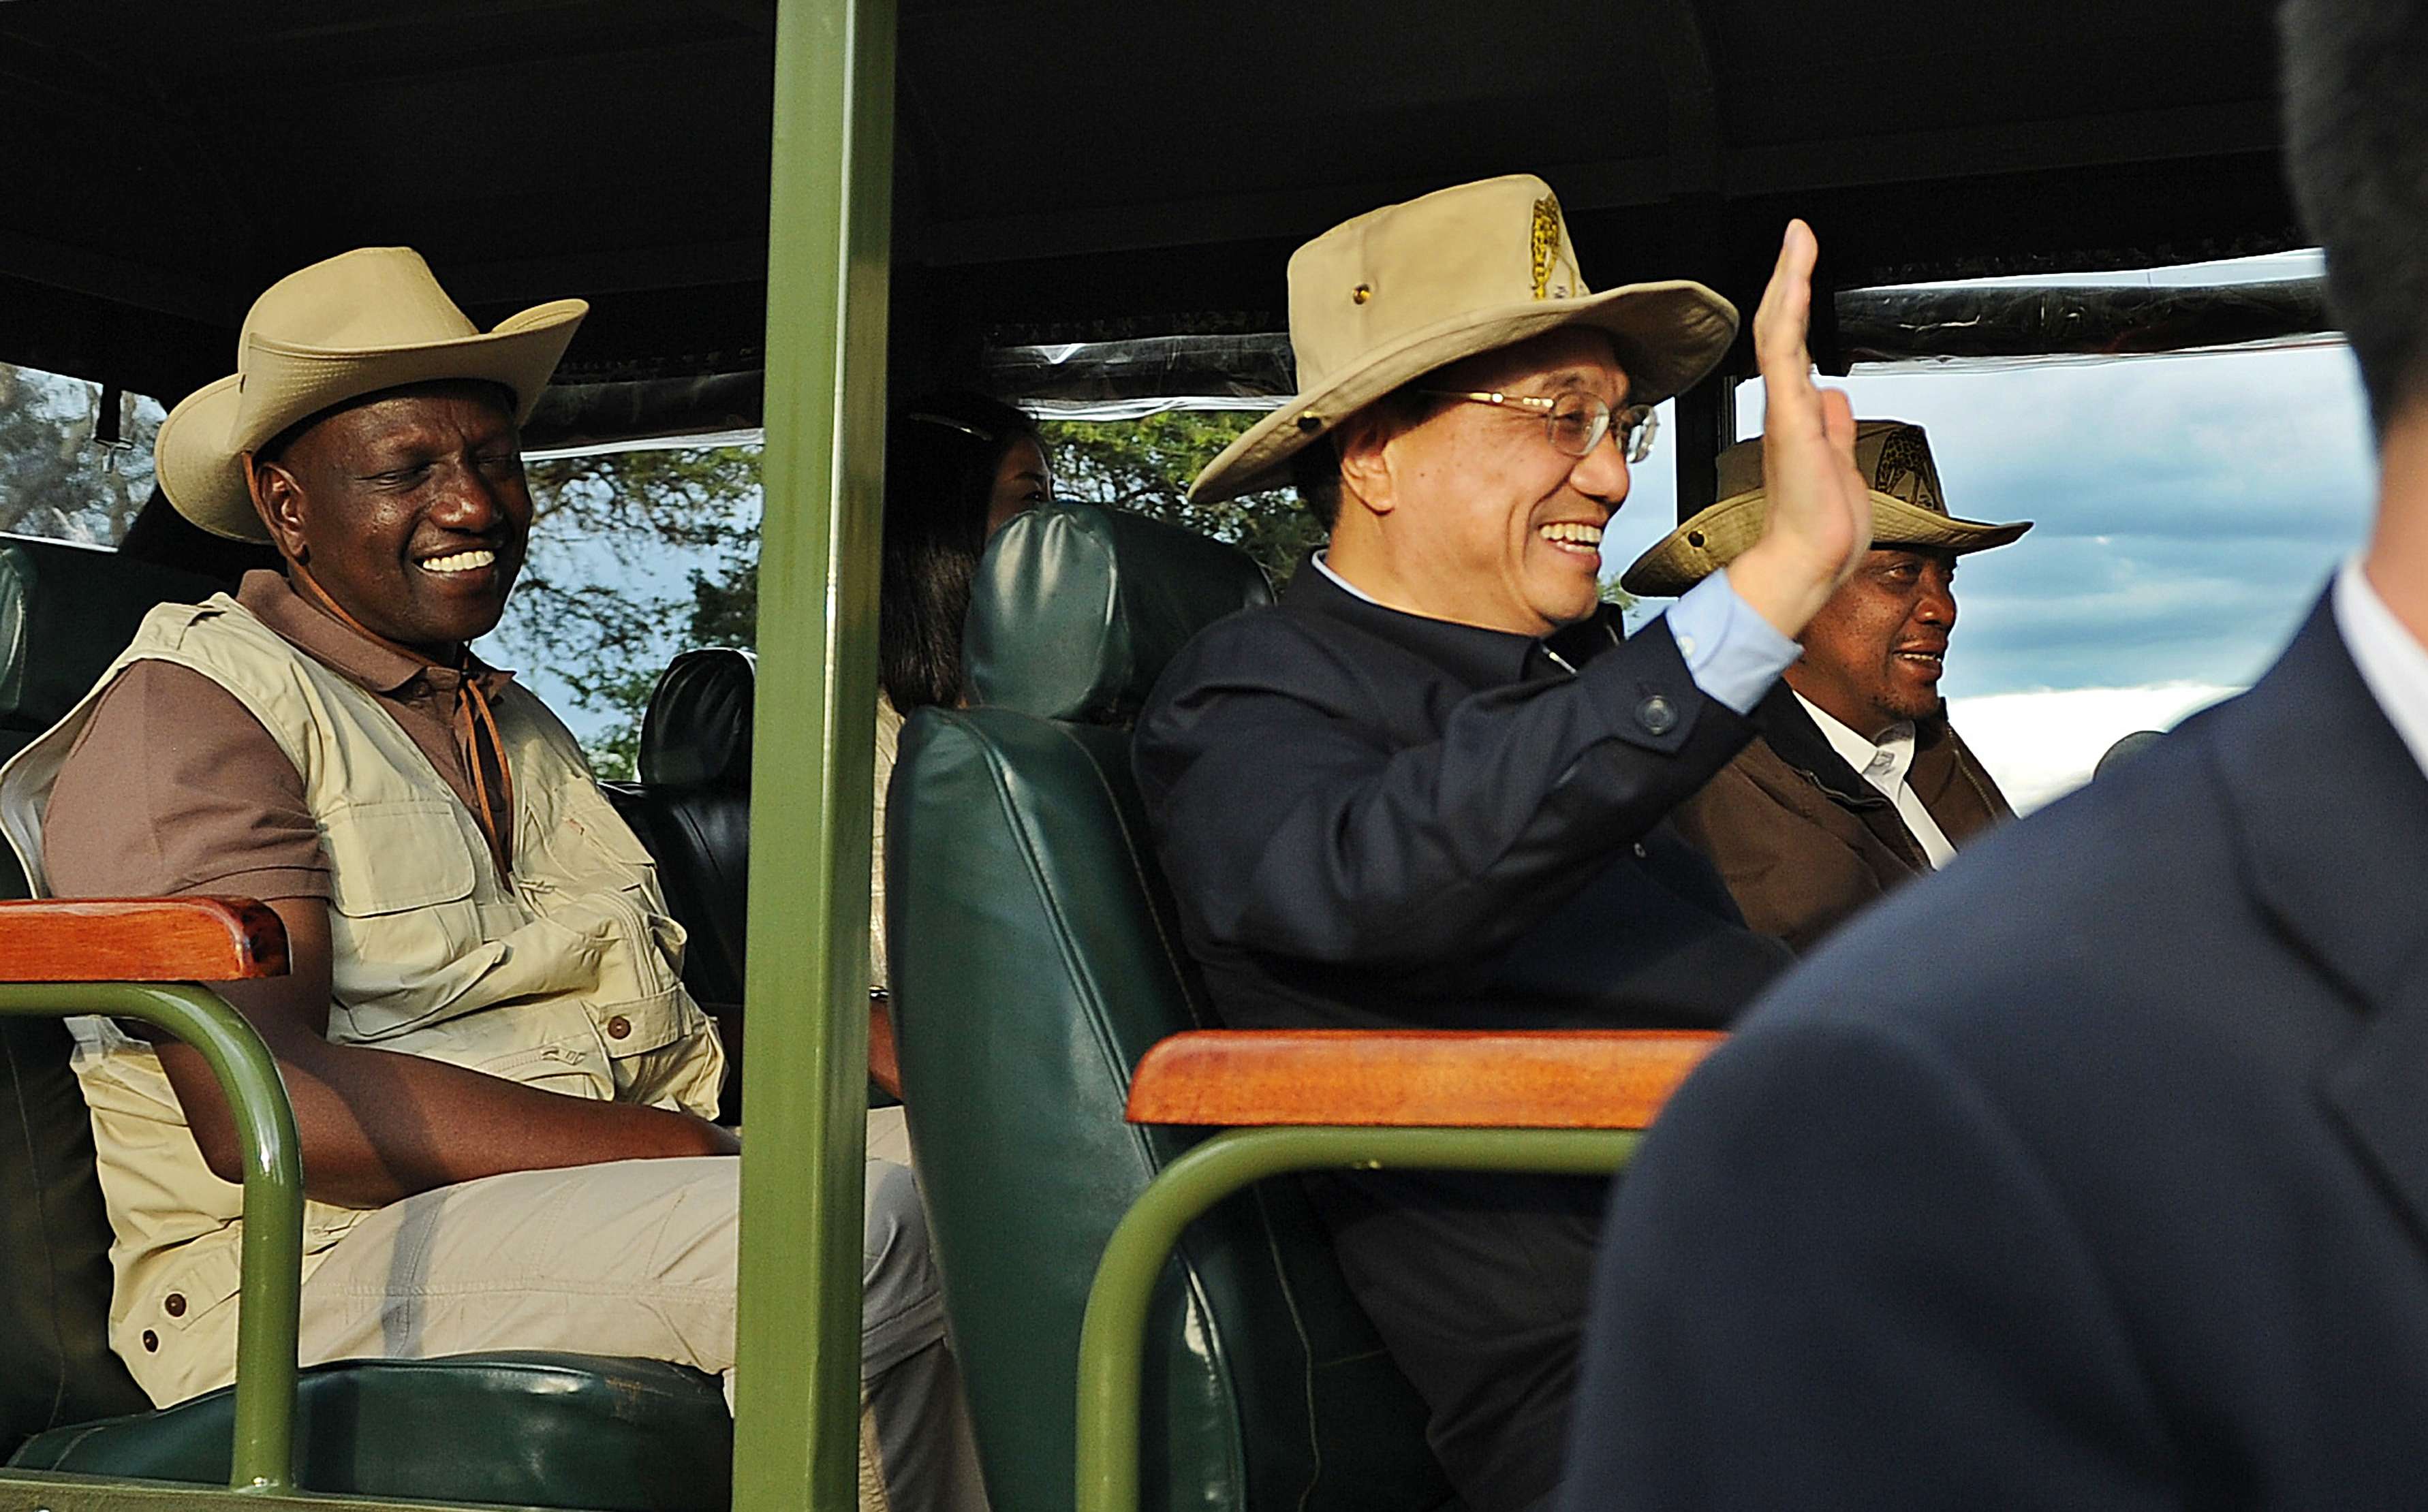 Chinese Prime Minister Li Keqiang rides in a customised game-viewing vehicle with Kenyan President, Uhuru Kenyatta, right, and his vice-President, William Ruto in May 2014 at the Nairobi national park. Kenya secured a loan to build the SGR line during the visit. Photo: AFP